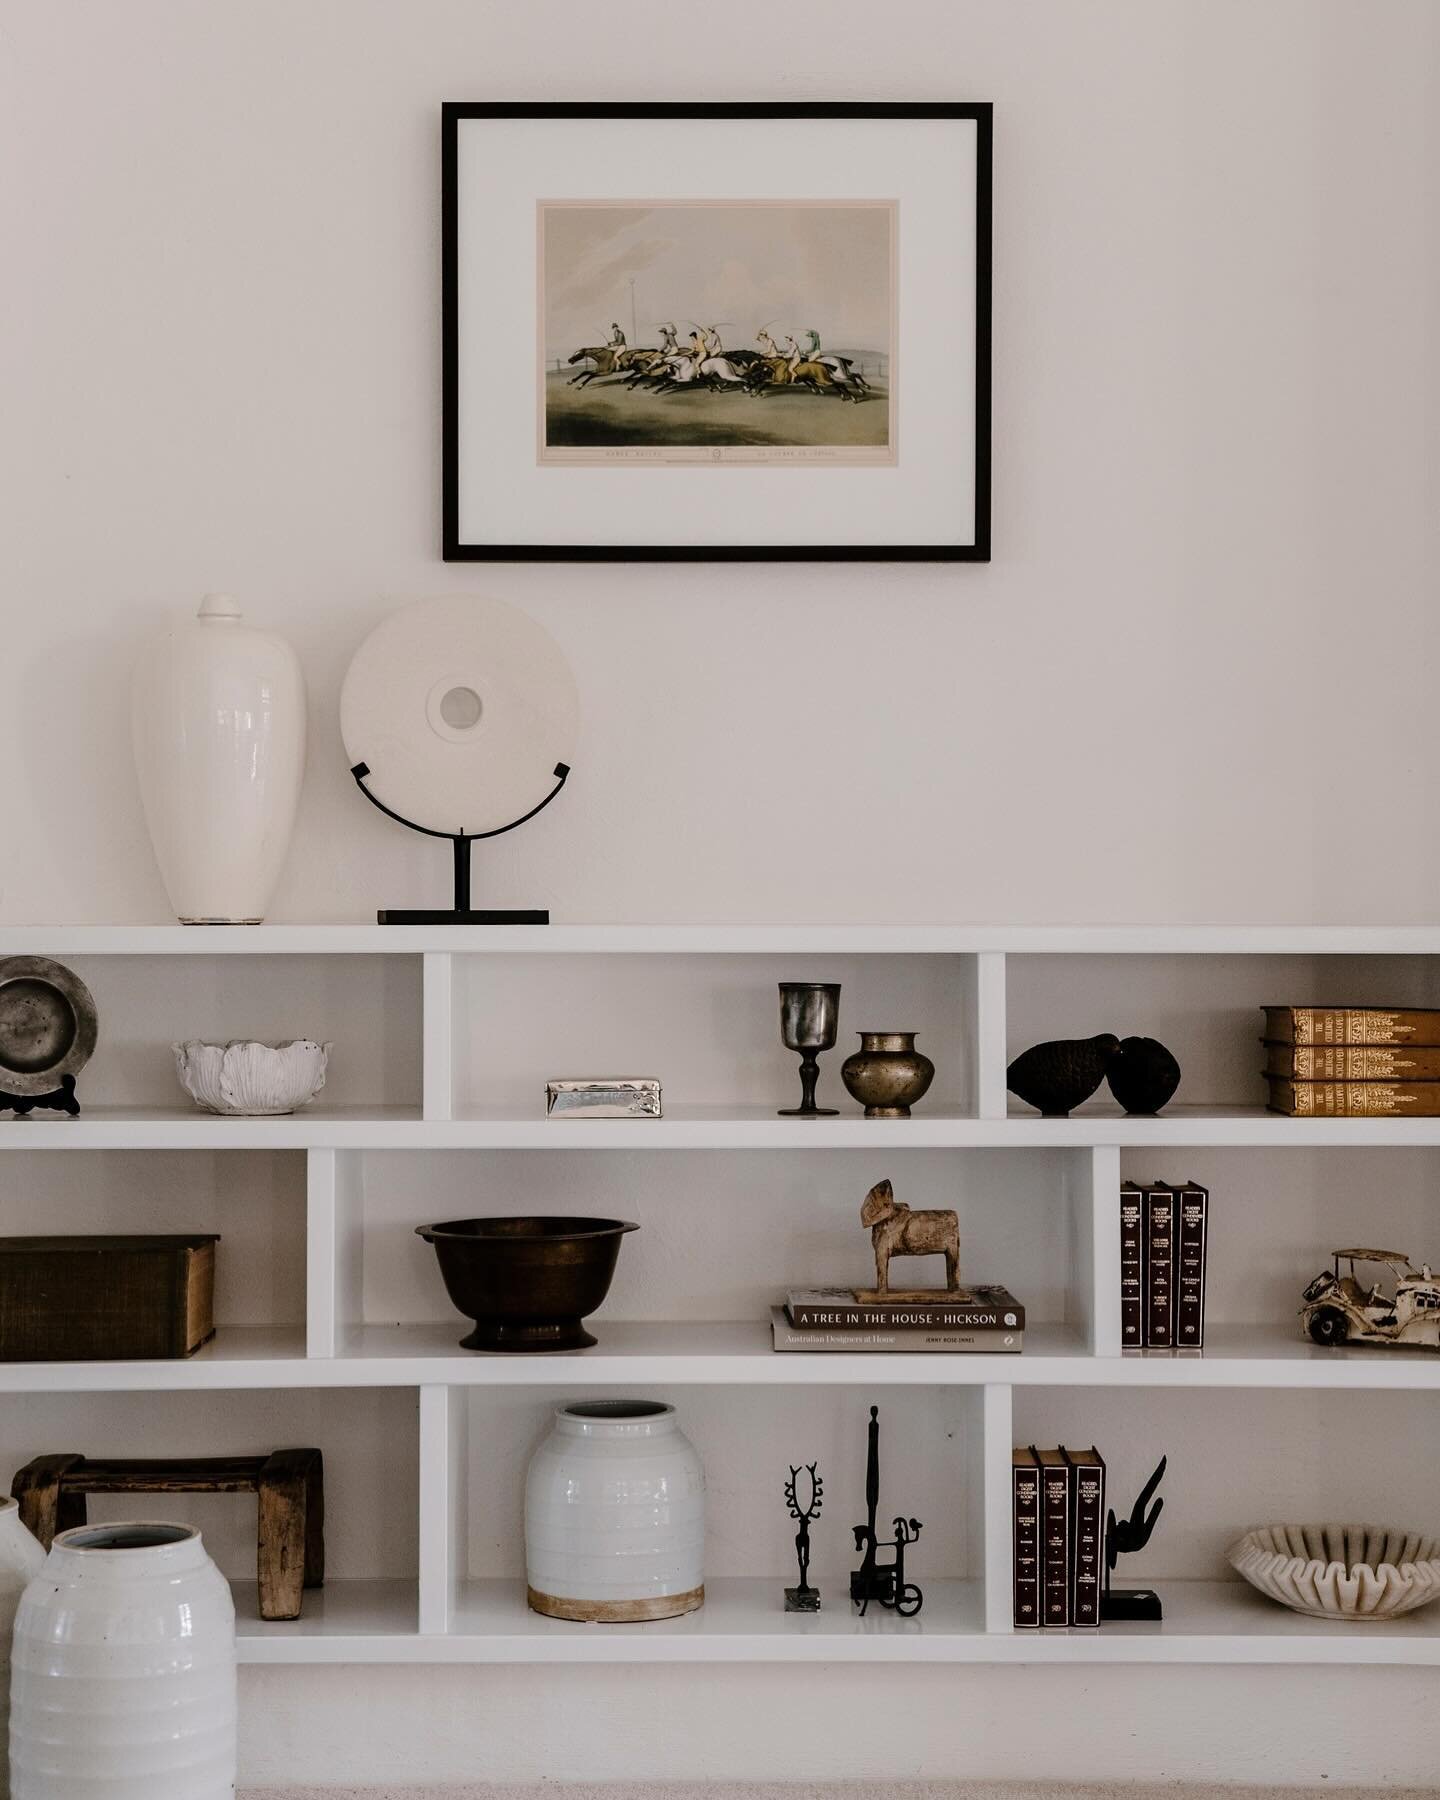 🕯️🪞⁠
It&rsquo;s the final details that really complete a space. Styling is key in providing a full transformation. ⁠
⠀⁠
⠀⁠
〰️⁠
⠀⁠
⁠
#thedesignpaddock⁠
#TDPStyling⁠
#interiordesign⁠
#australianhomes⁠
#australianinteriordesign⁠
#interiorsourcing⁠
#in